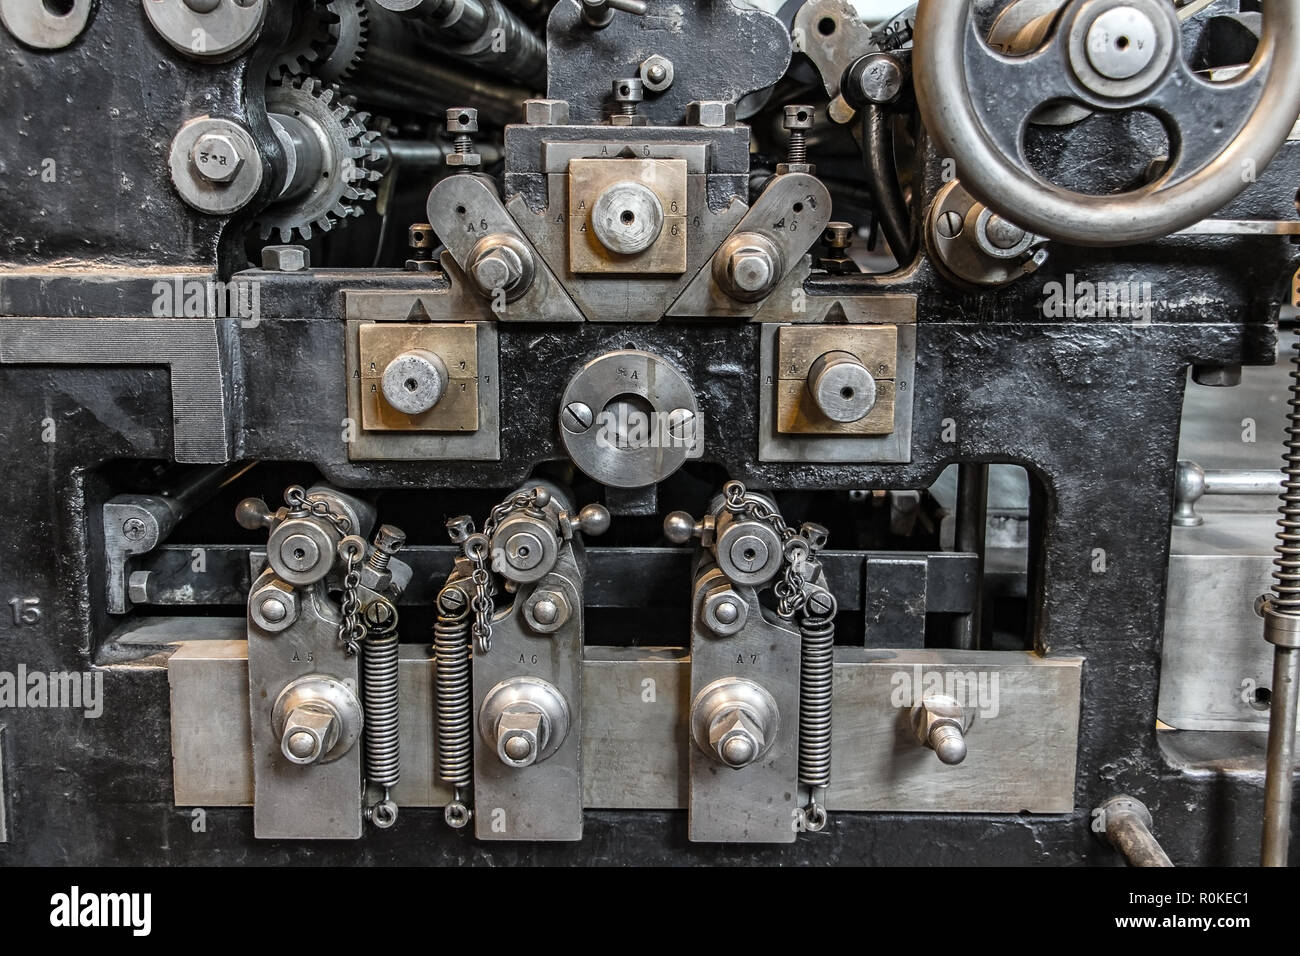 The detailed look at the part of high-speed rocking press, made in Germany 1910. A steel machine complicated  as perpetuum mobile, close up. Stock Photo